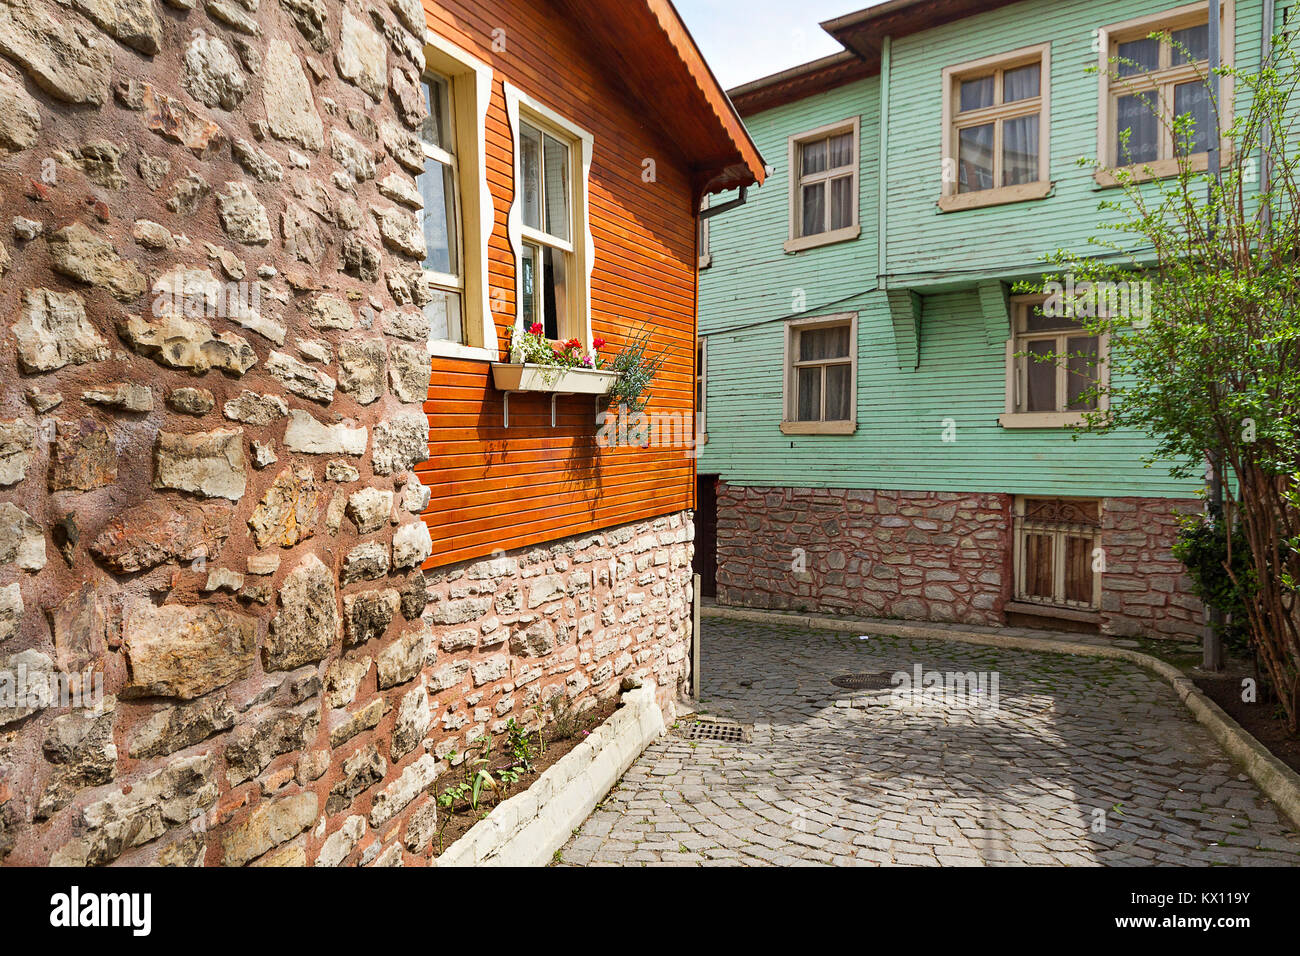 Colorful ottoman houses in the Edirnekapi district in Istanbul, Turkey. Stock Photo